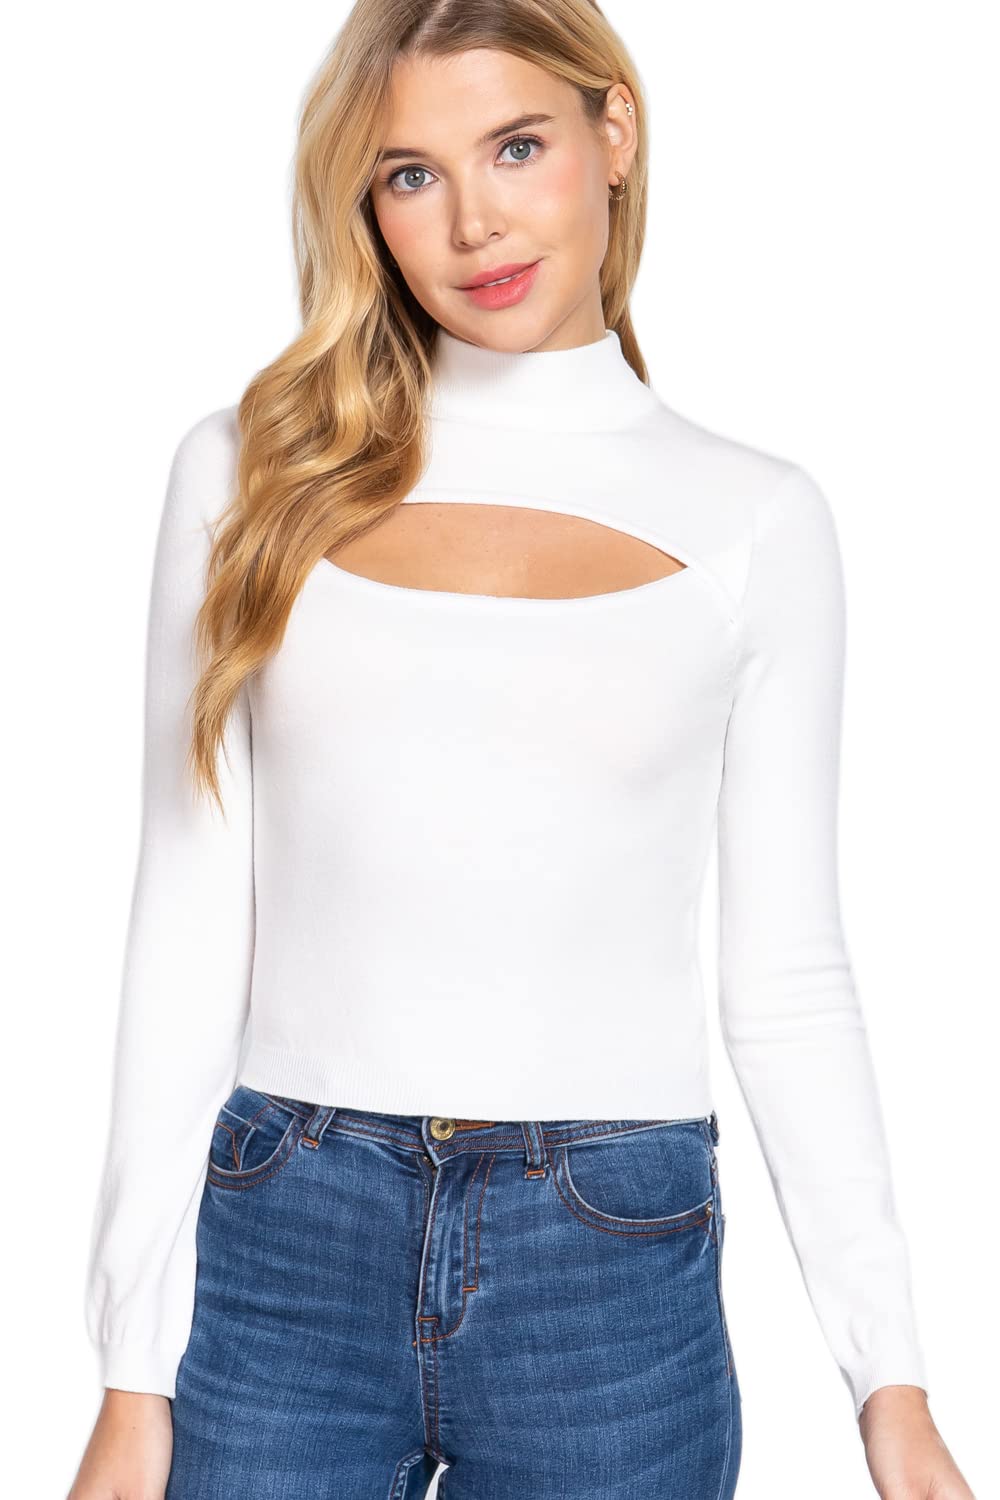 Women's Long Sleeves Mock Neck Front Cut Out Keyhole Sweater